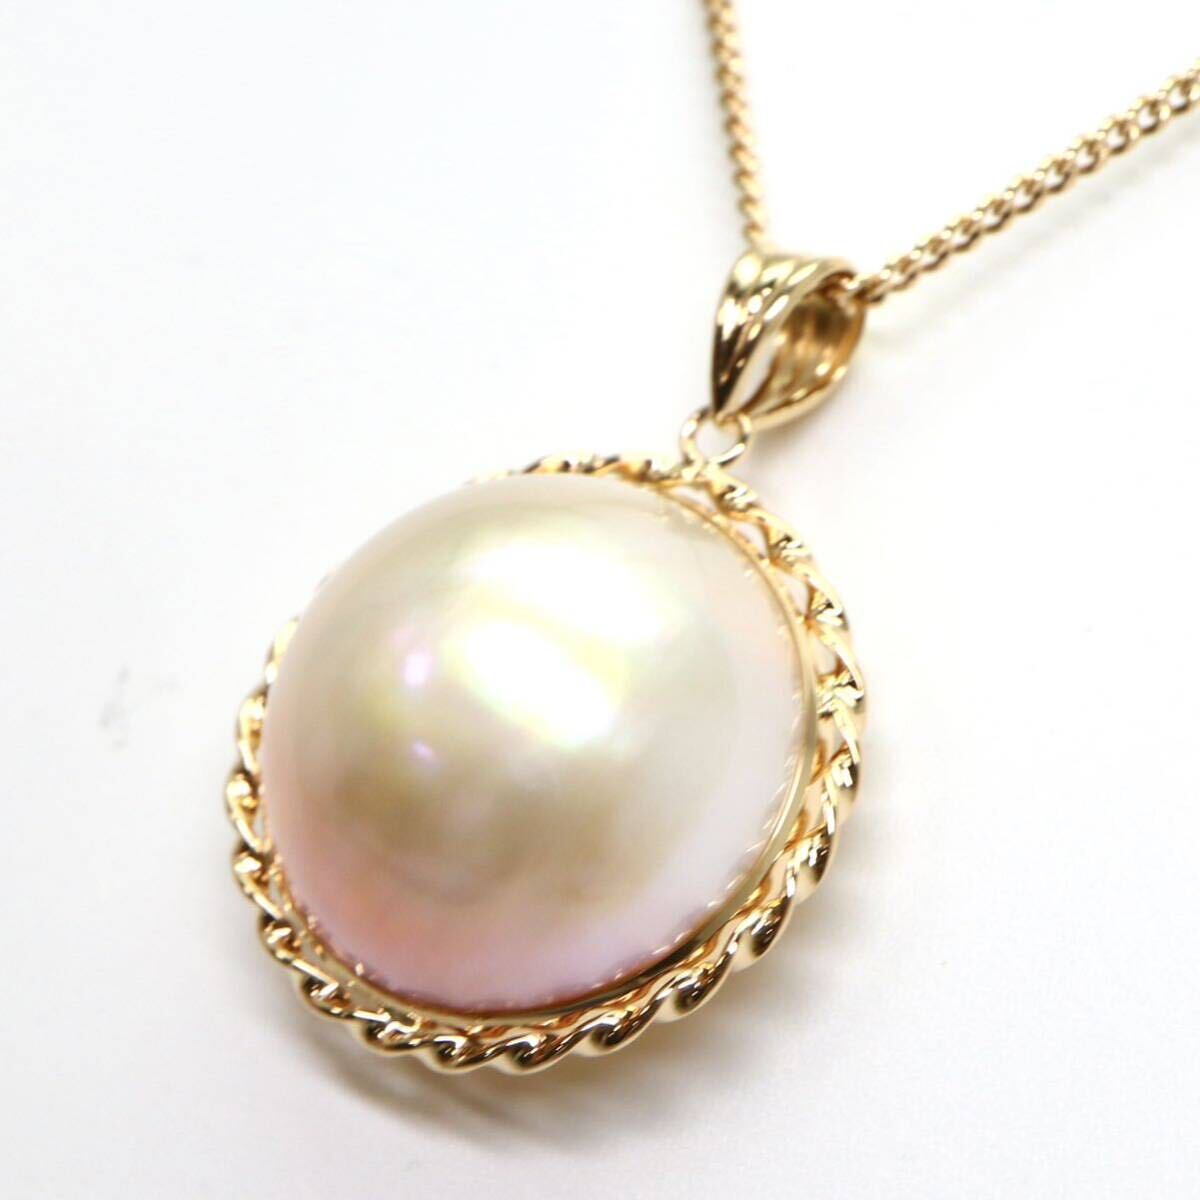 *K18mabe pearl necklace *M approximately 5.5g approximately 40.0cm pearl pearl diamond necklace jewelry jewelry EC3/EC3